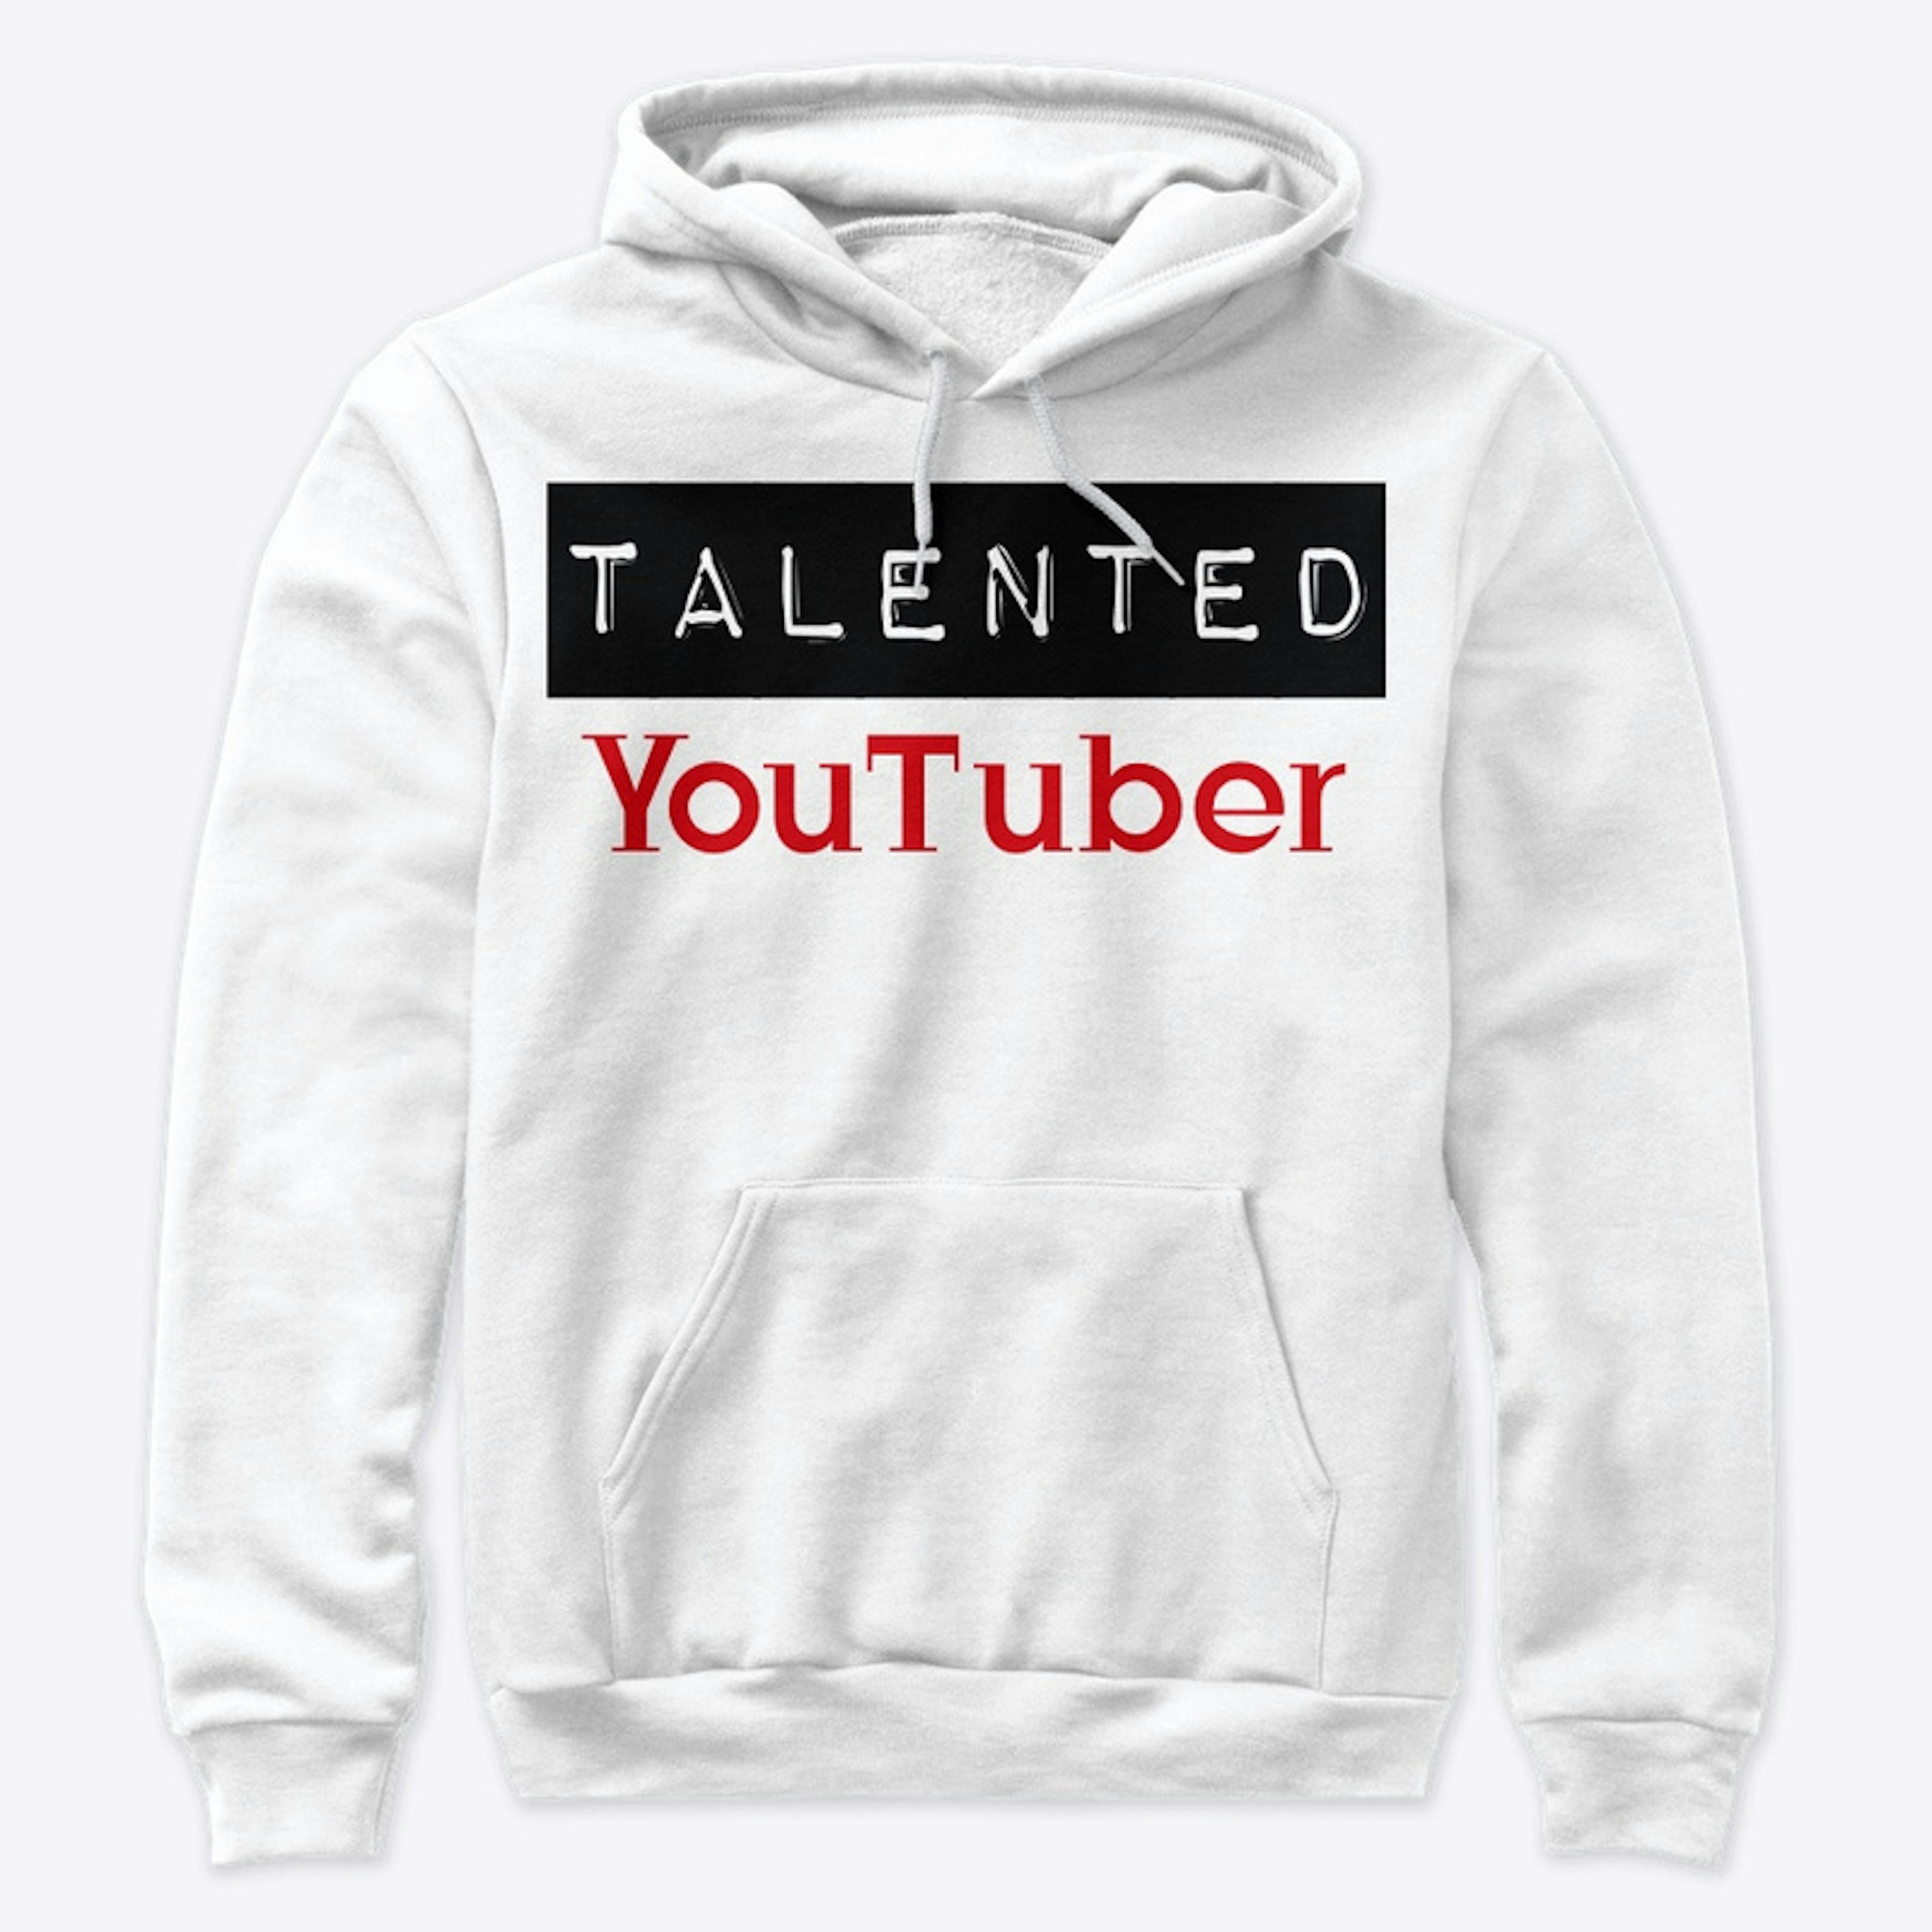 Talented YouTuber